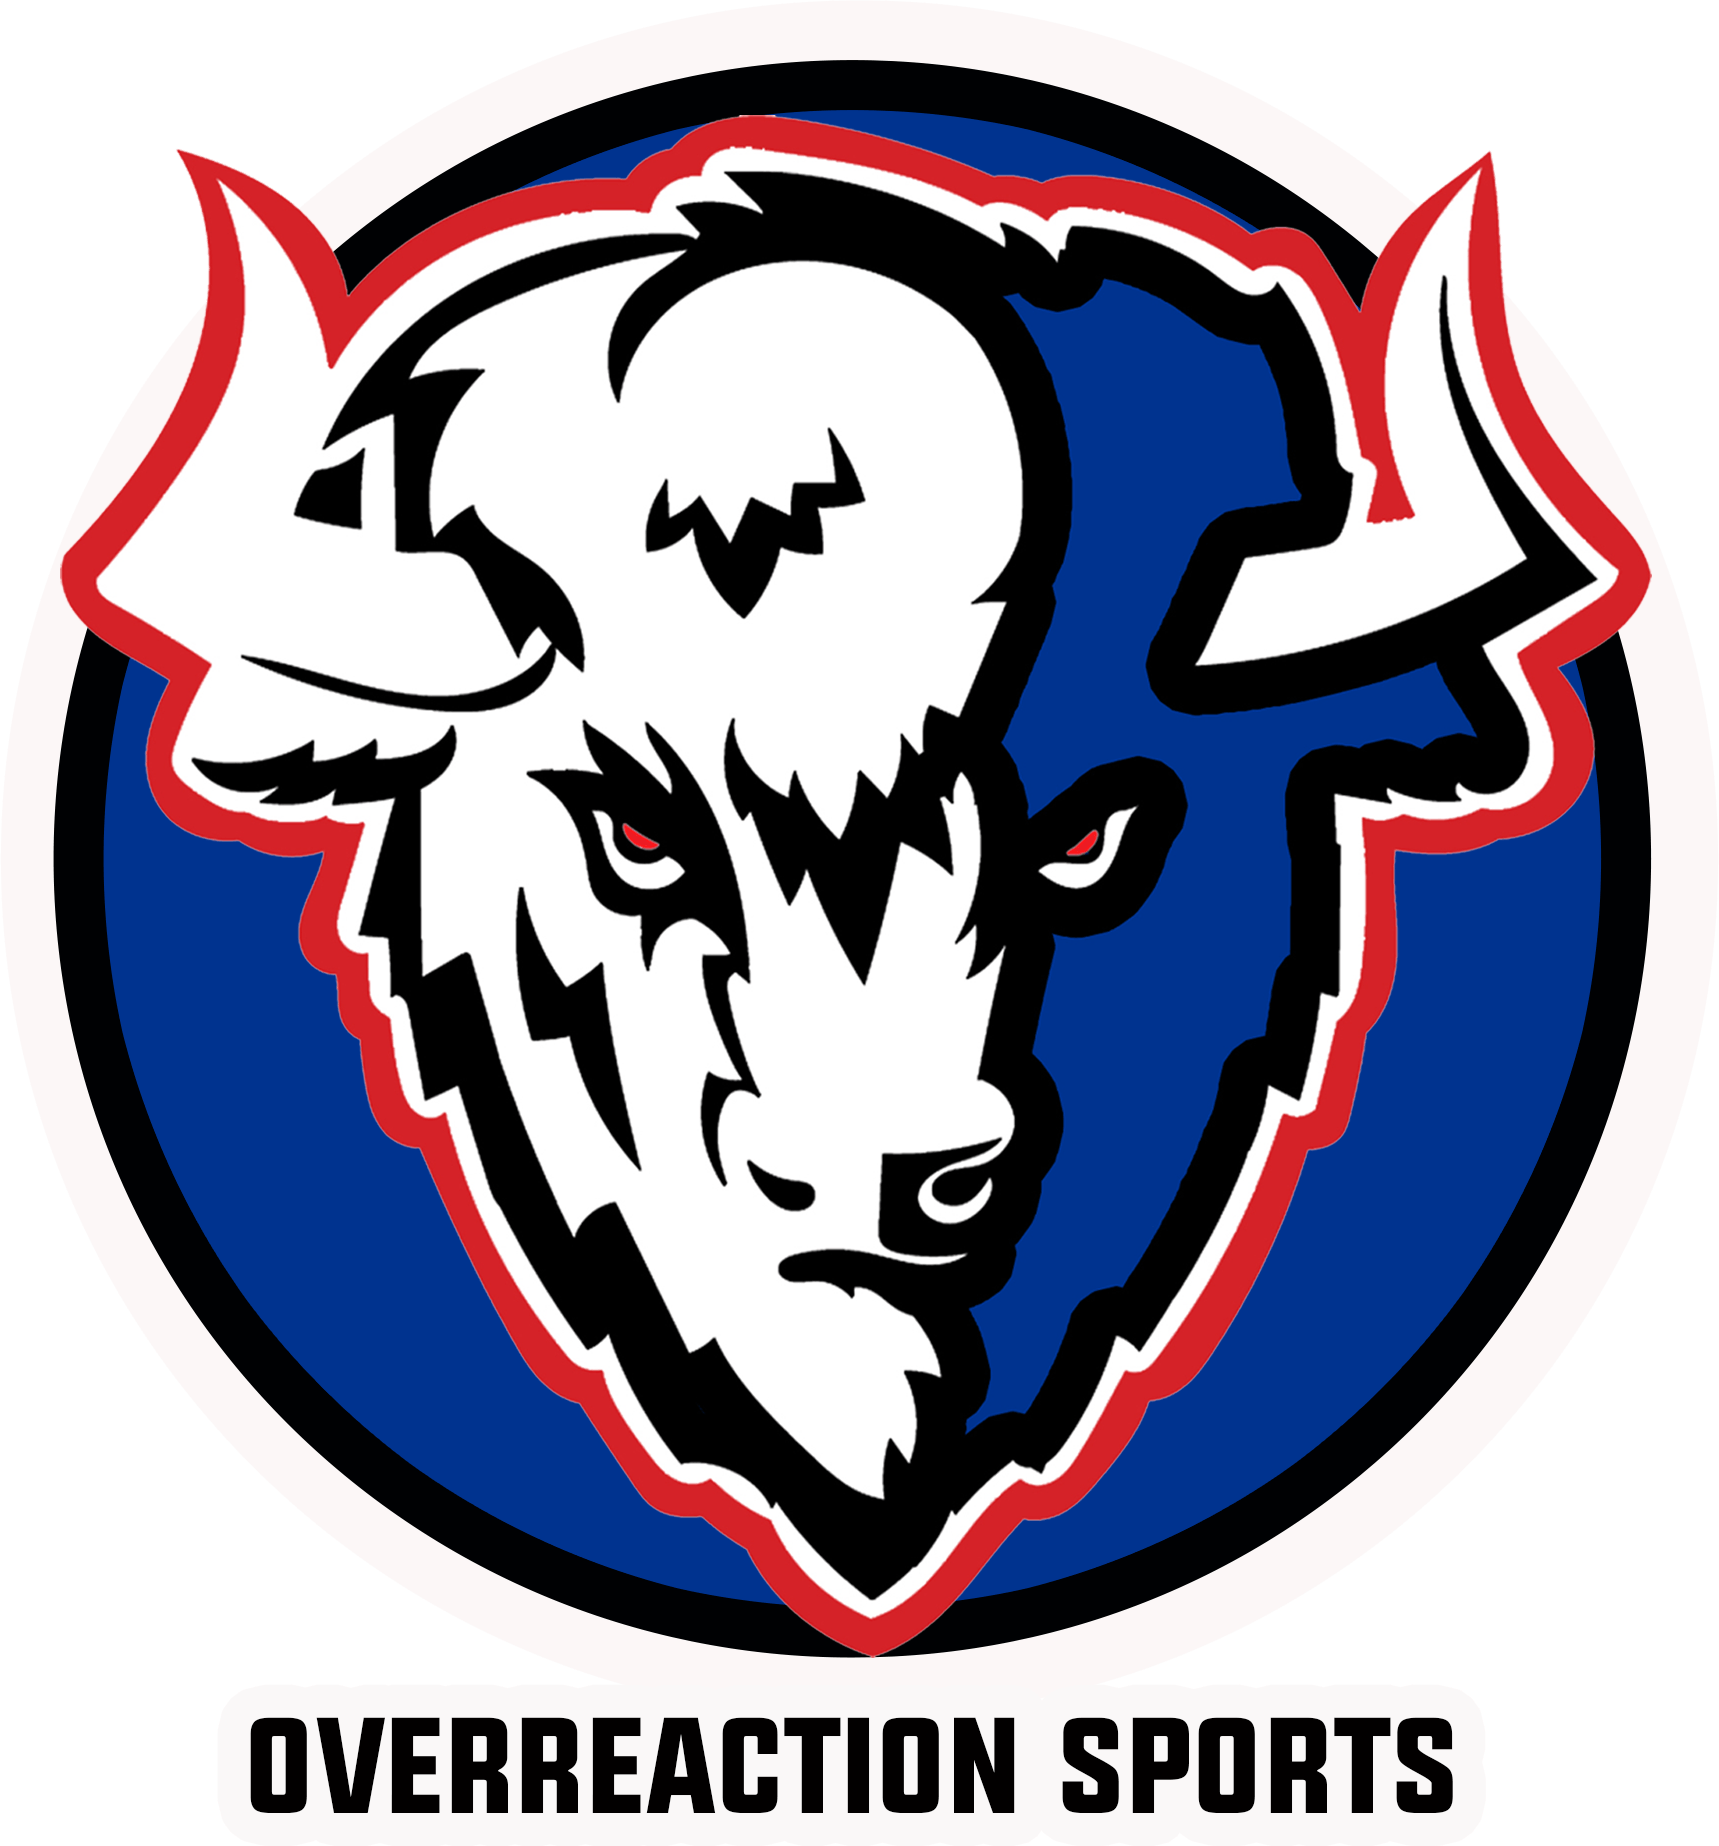 Overreaction Buffalo | Stefon Diggs, Should He Stay or Go?